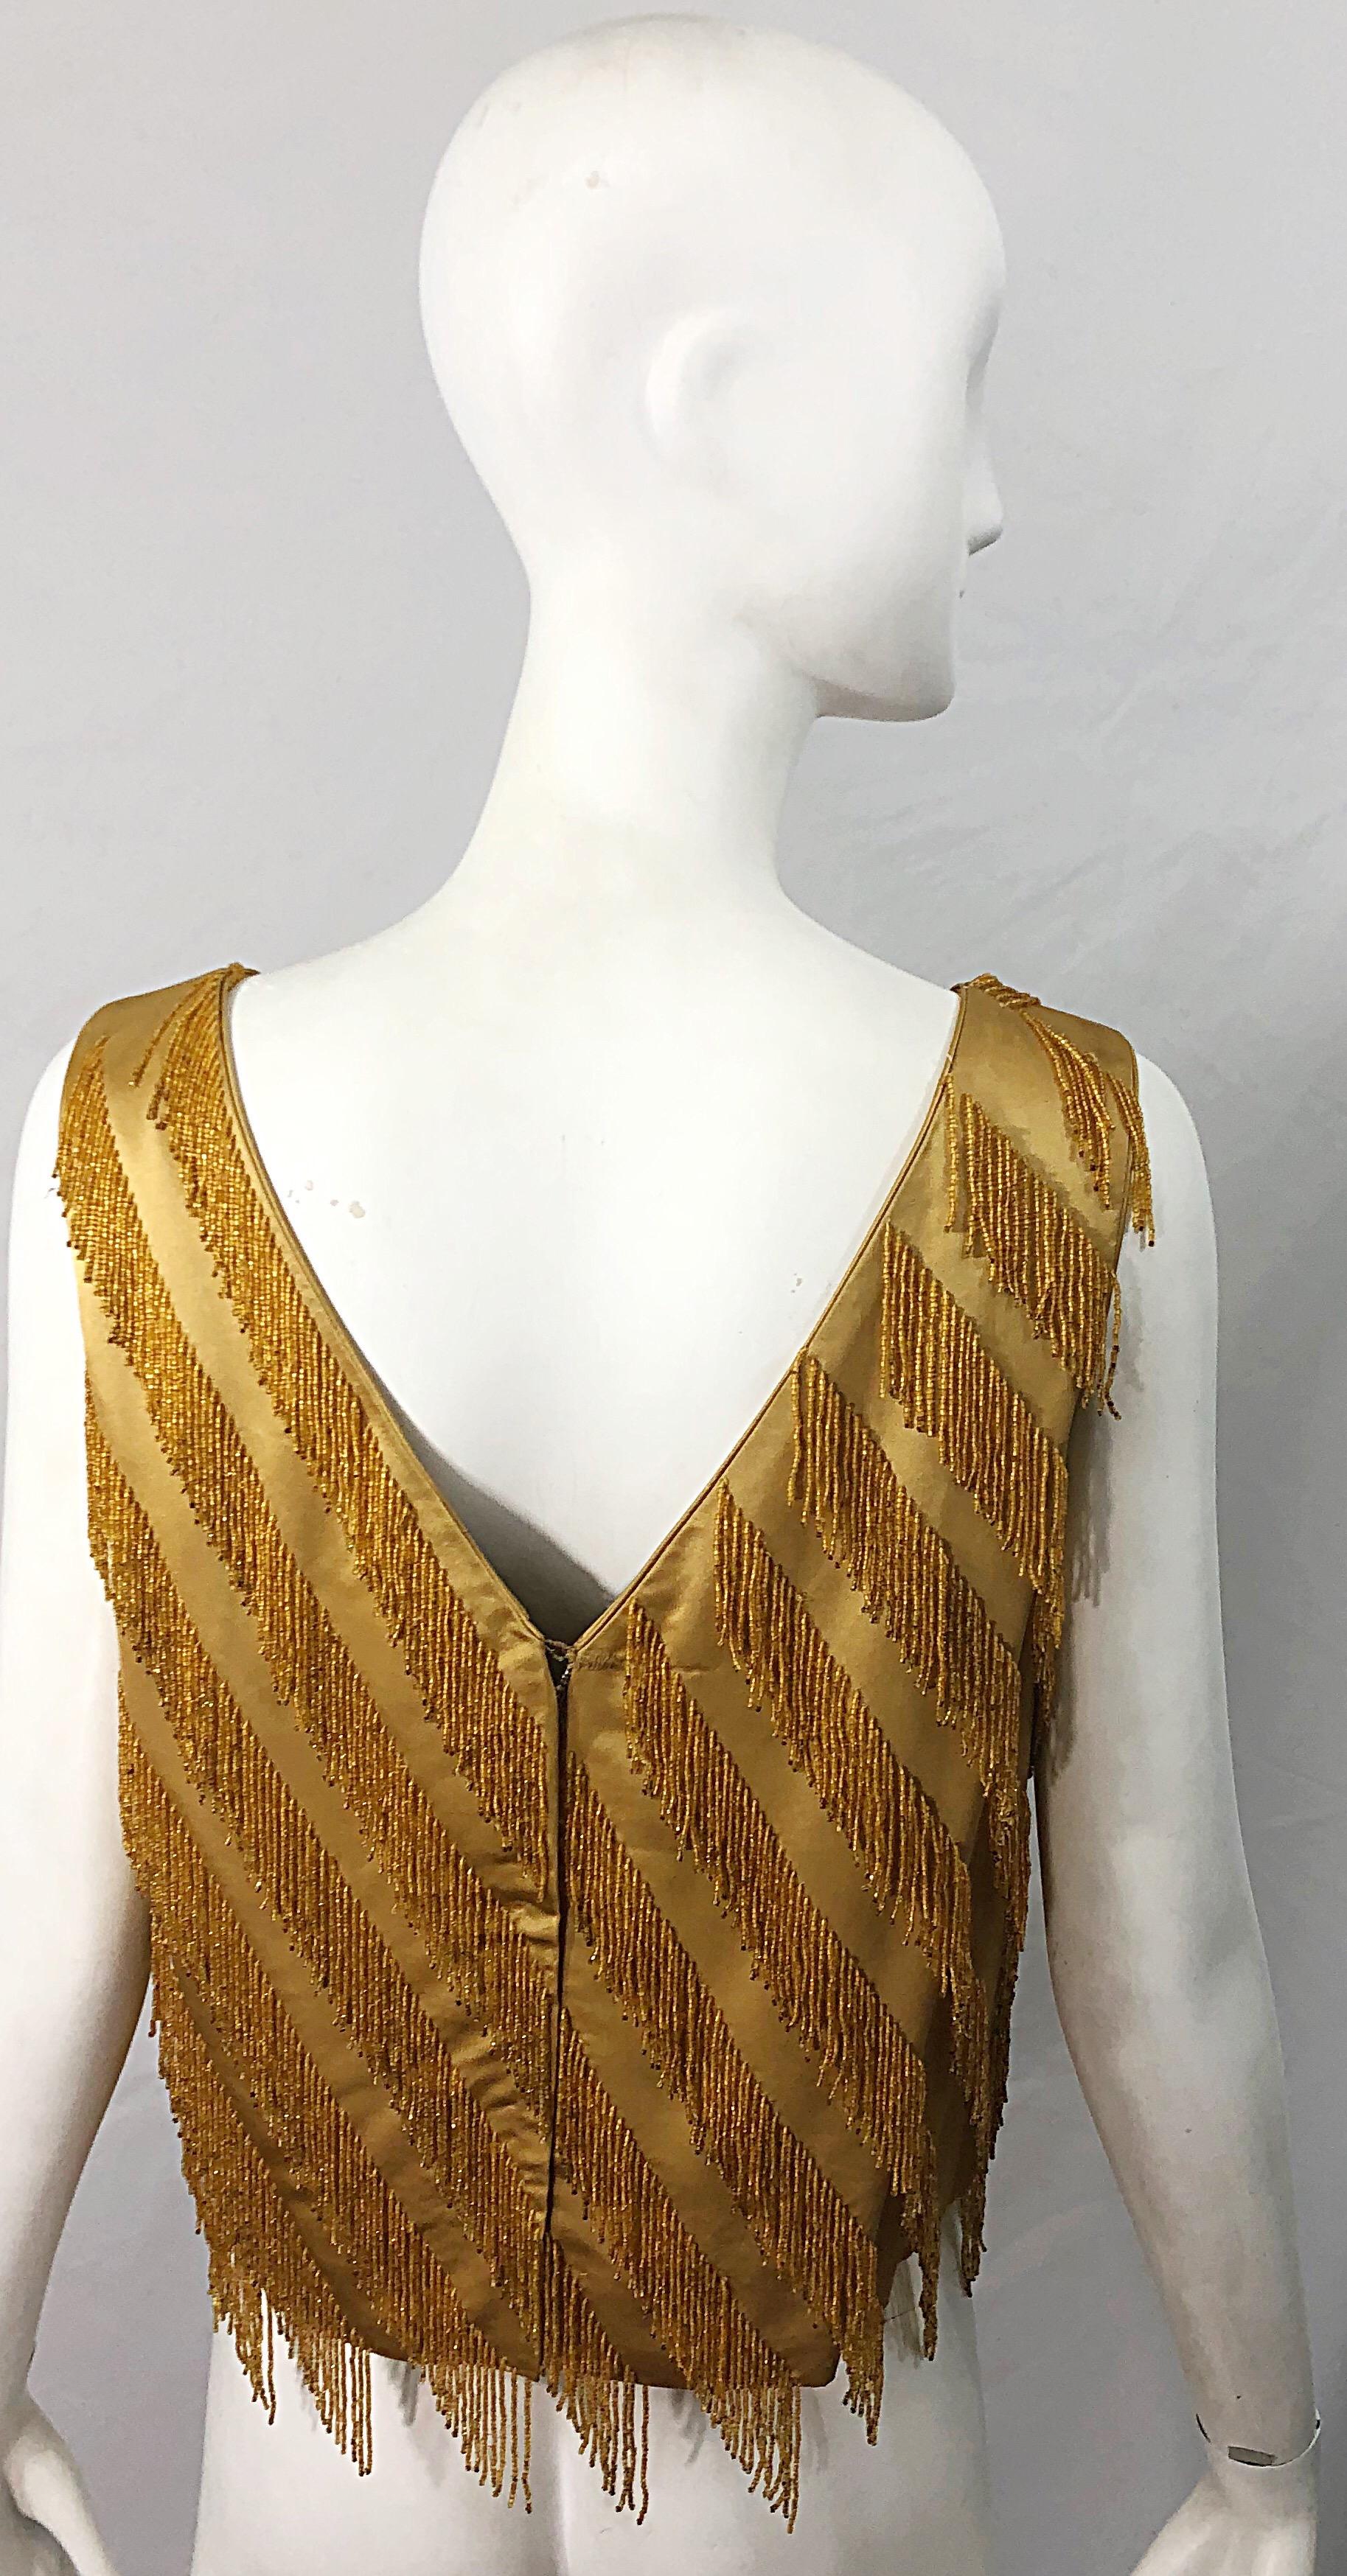 1960s Gene Shelly Gold Beaded Silk Rayon Vintage 60s Sleeveless Blouse Top For Sale 5